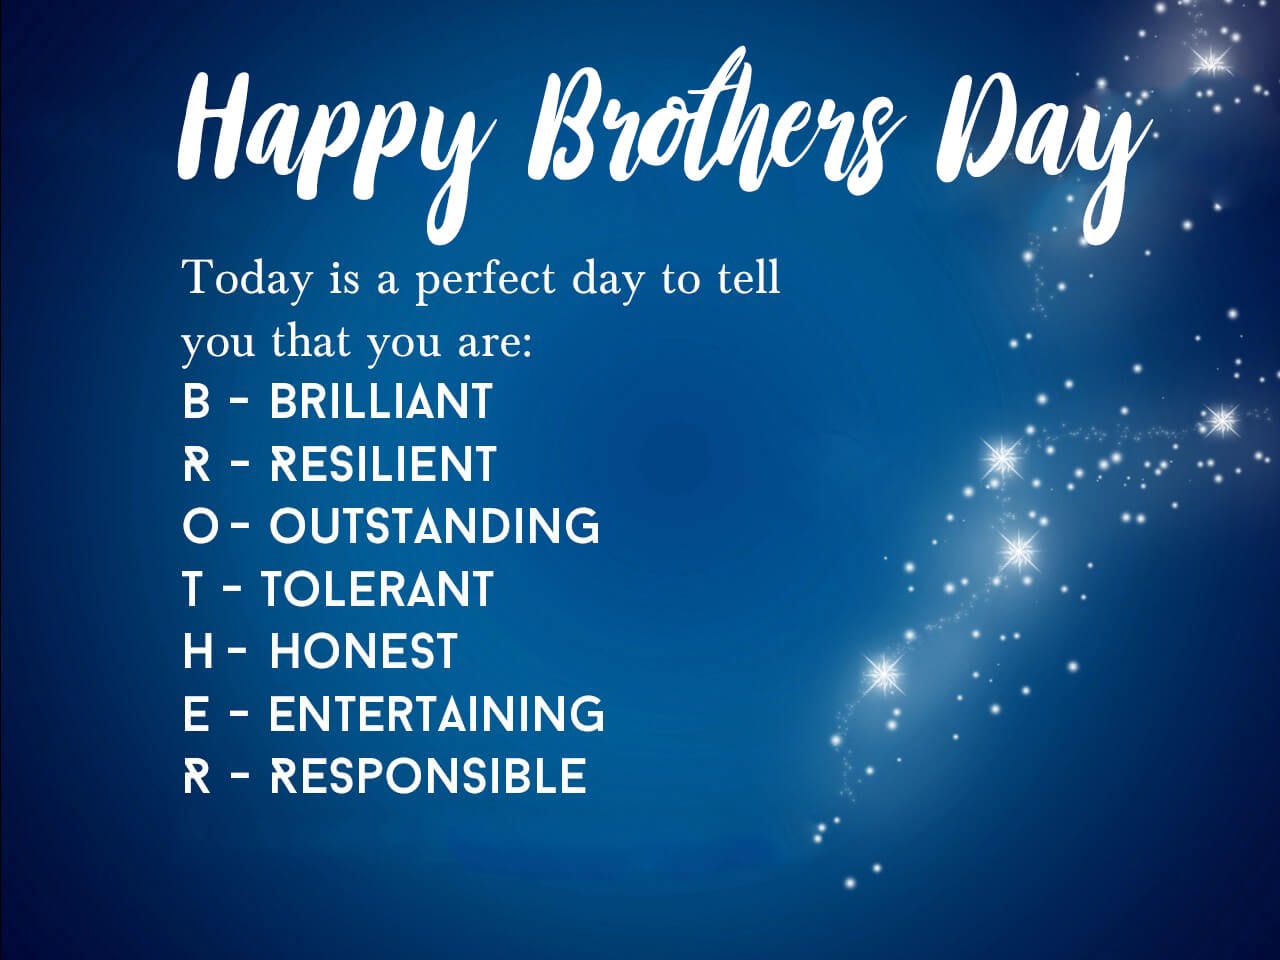 Happy Brothers Day Wishes Greetings Expansion Text Image